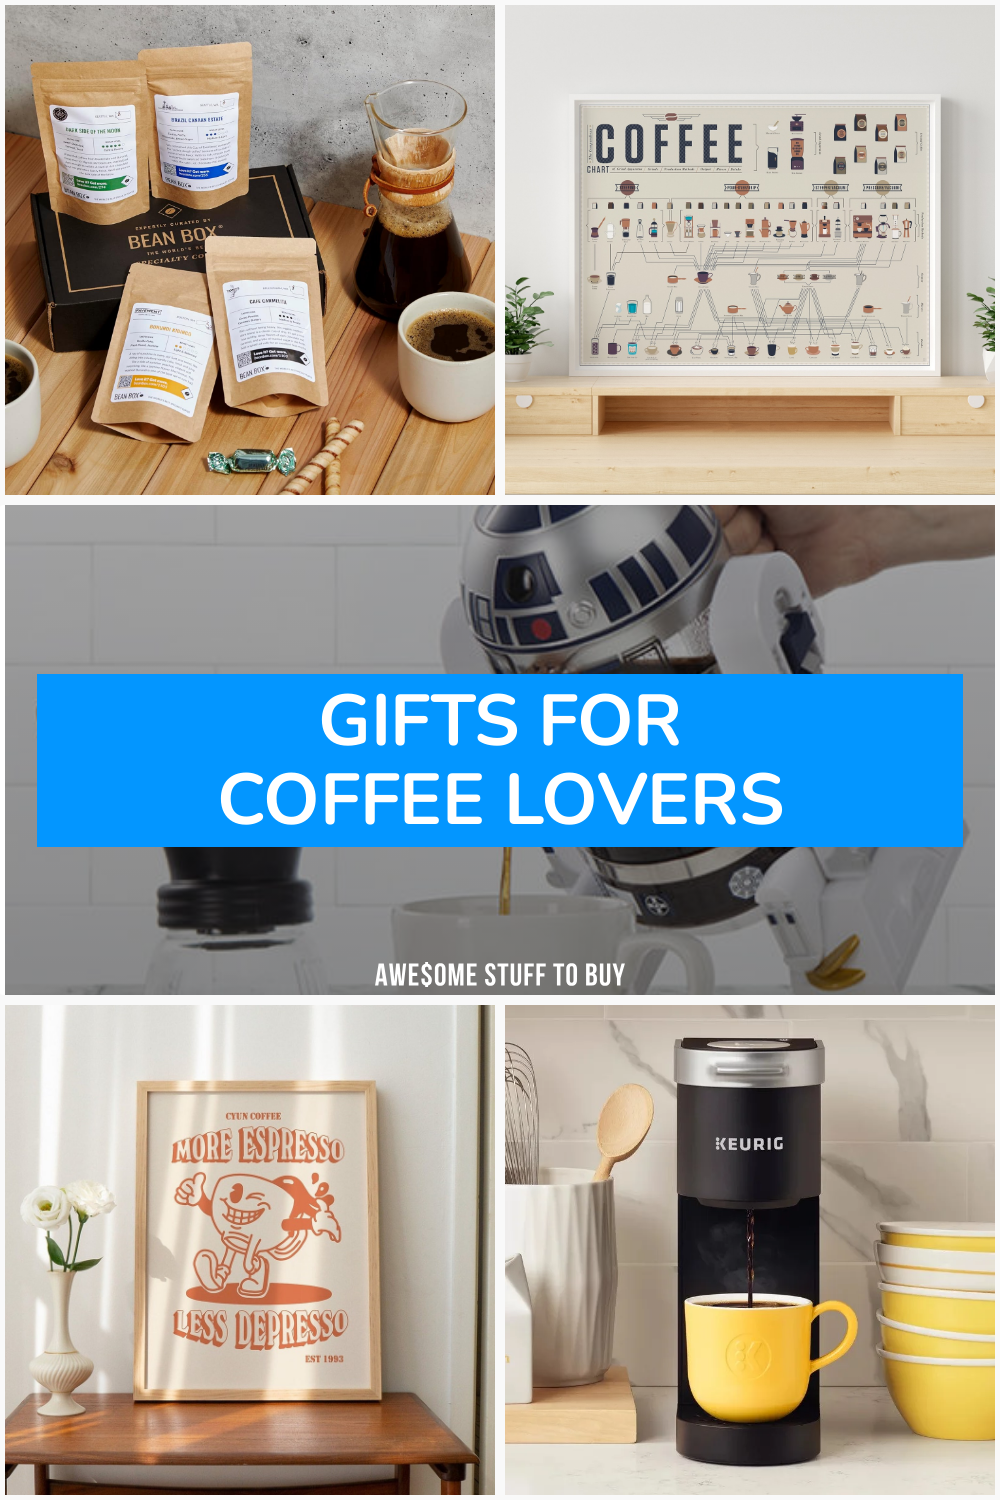 Coffee Gifts // Awesome Stuff to Buy